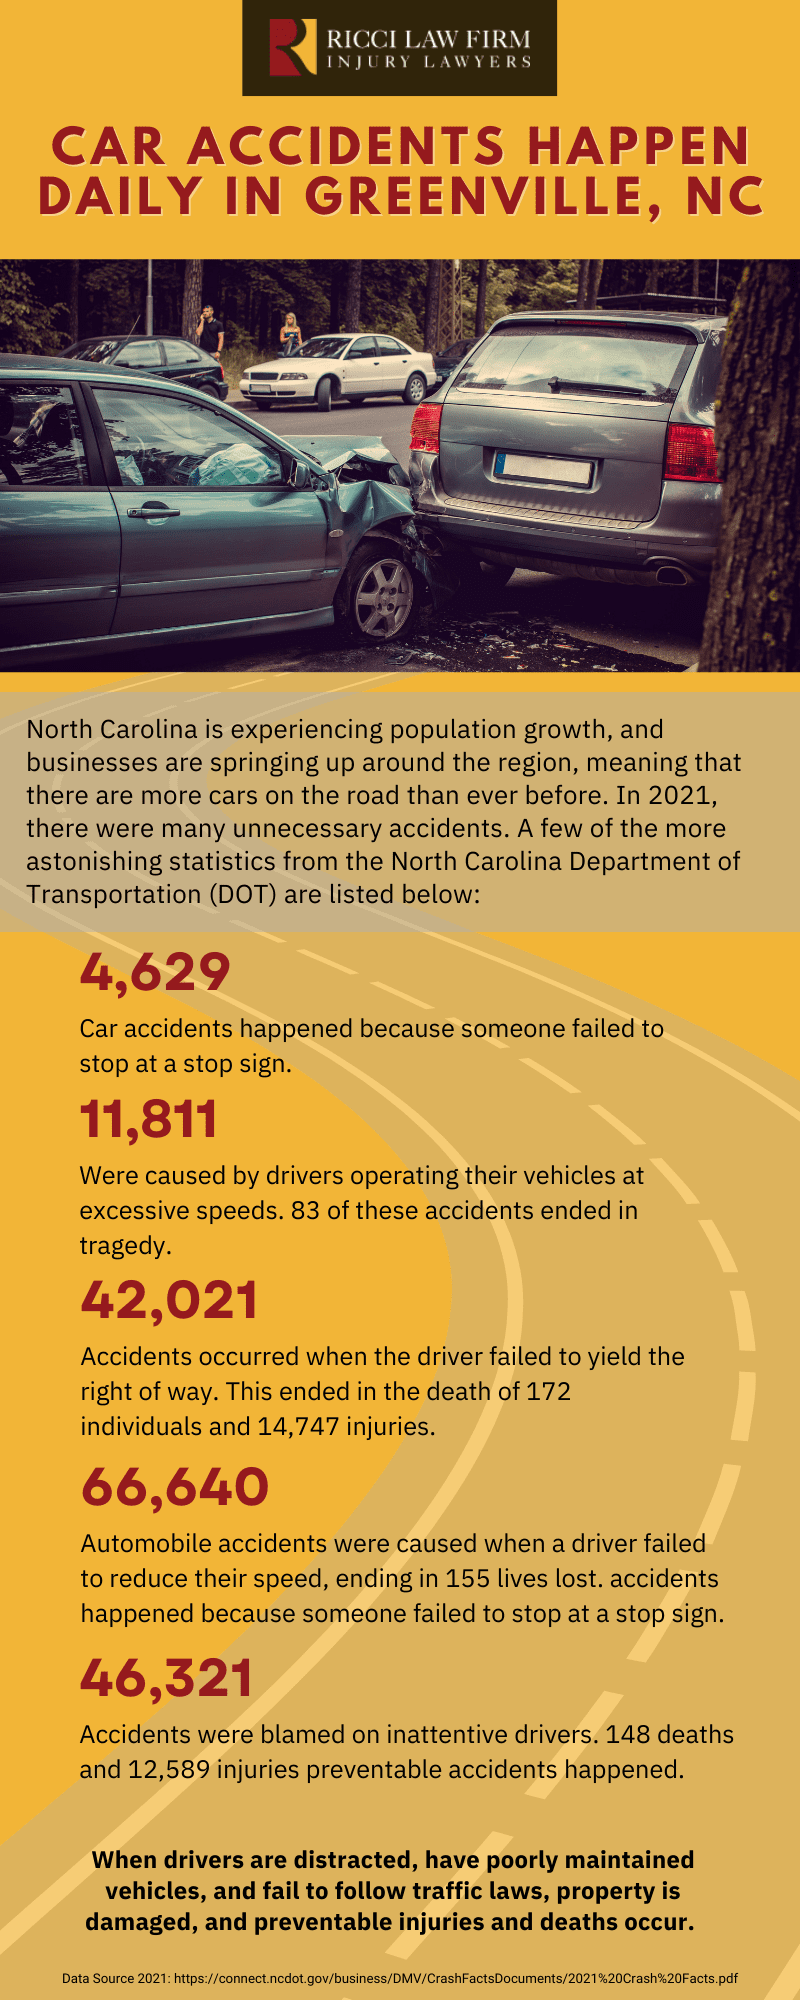 car-accidents-happen-daily-greenville-nc-graphic